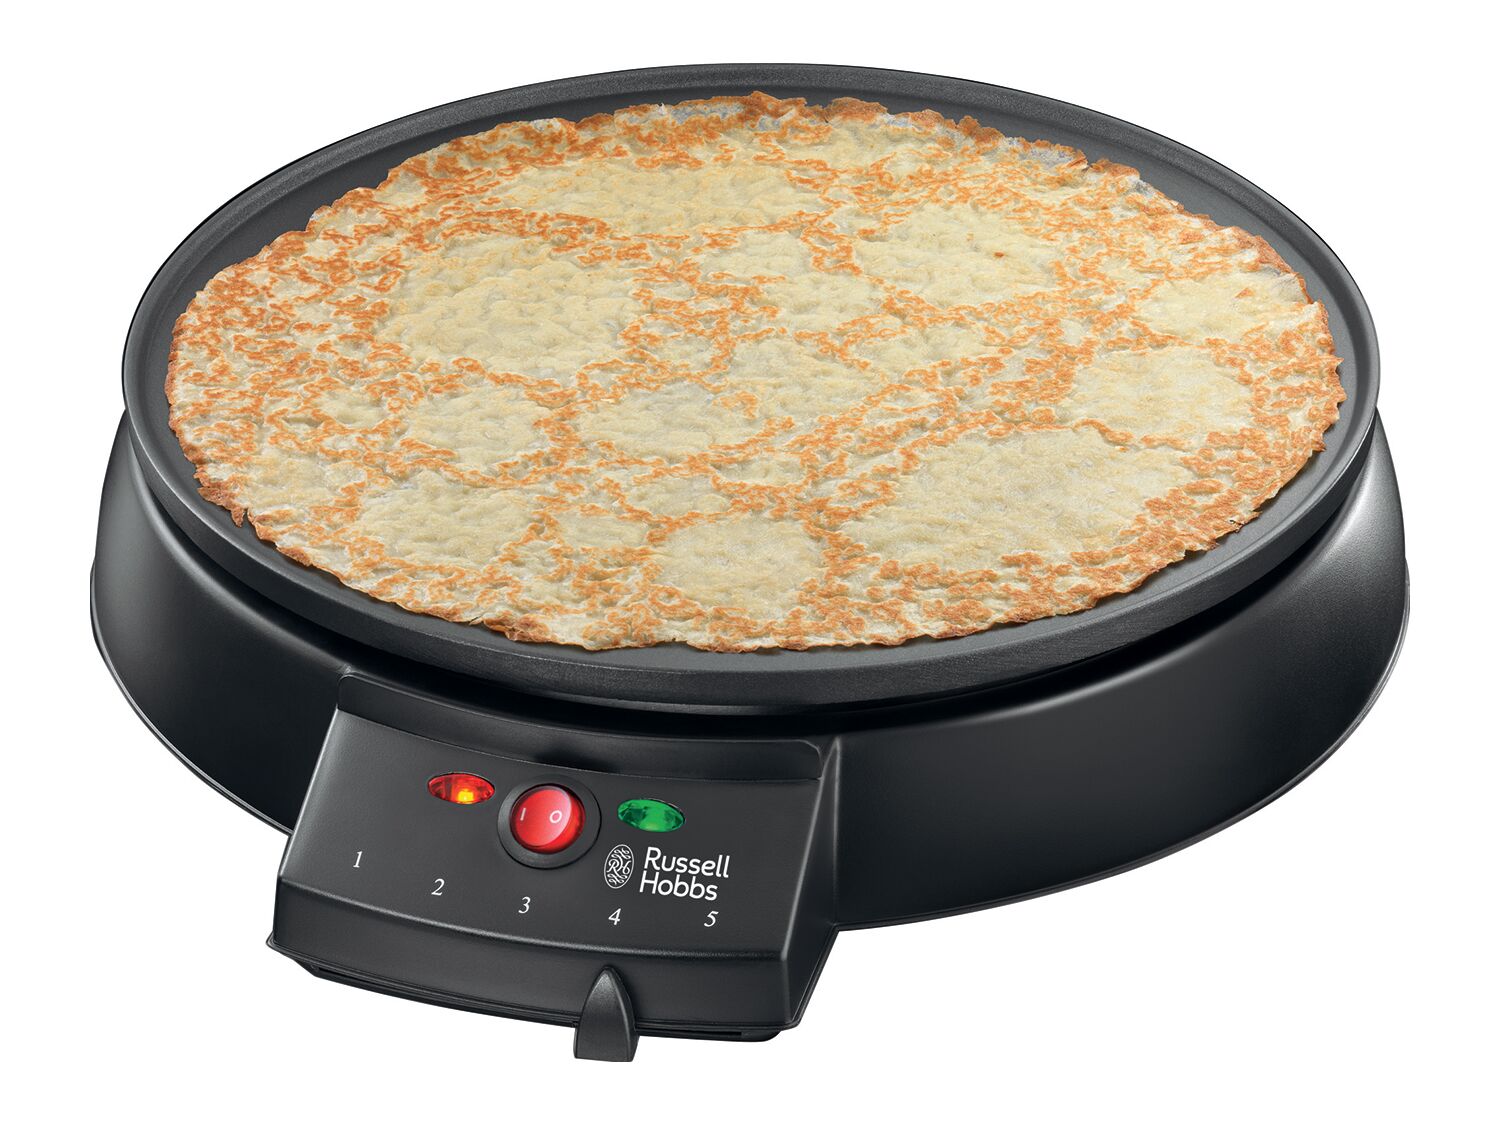 Russel Hobbs Máquina para hacer crepes 1000W